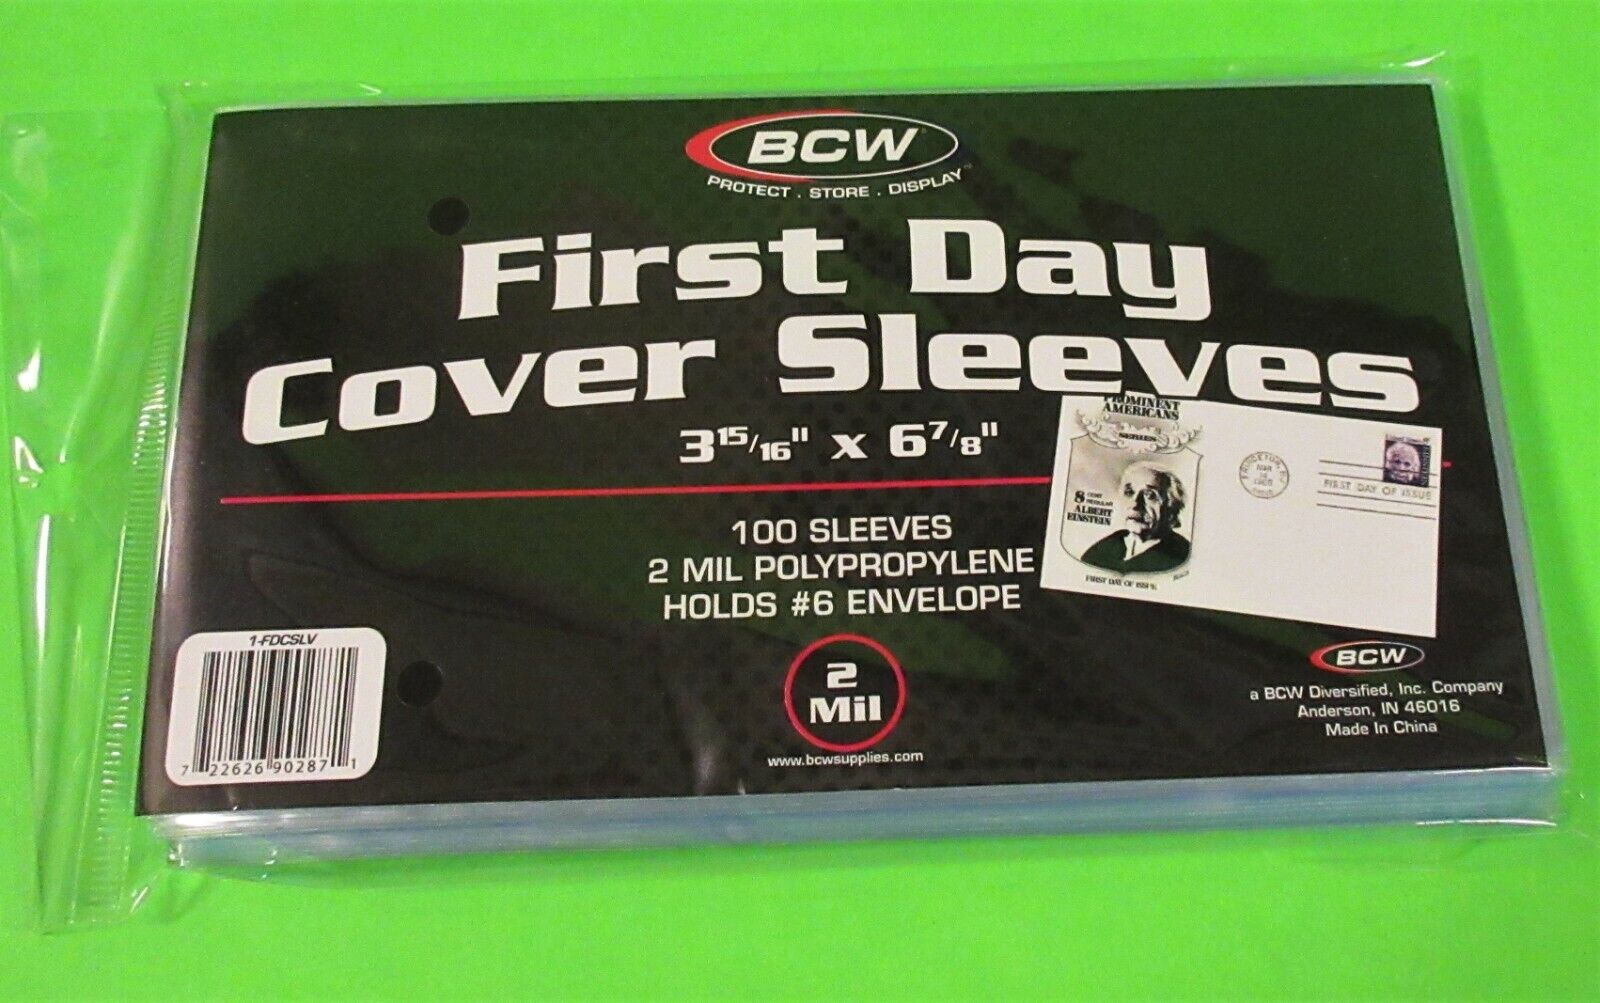 100 FIRST DAY COVER POLY SLEEVES, FOR #6 COVERS, 2 MIL CRYSTAL CLEAR - BCW BRAND BCW 1-FDCSLV